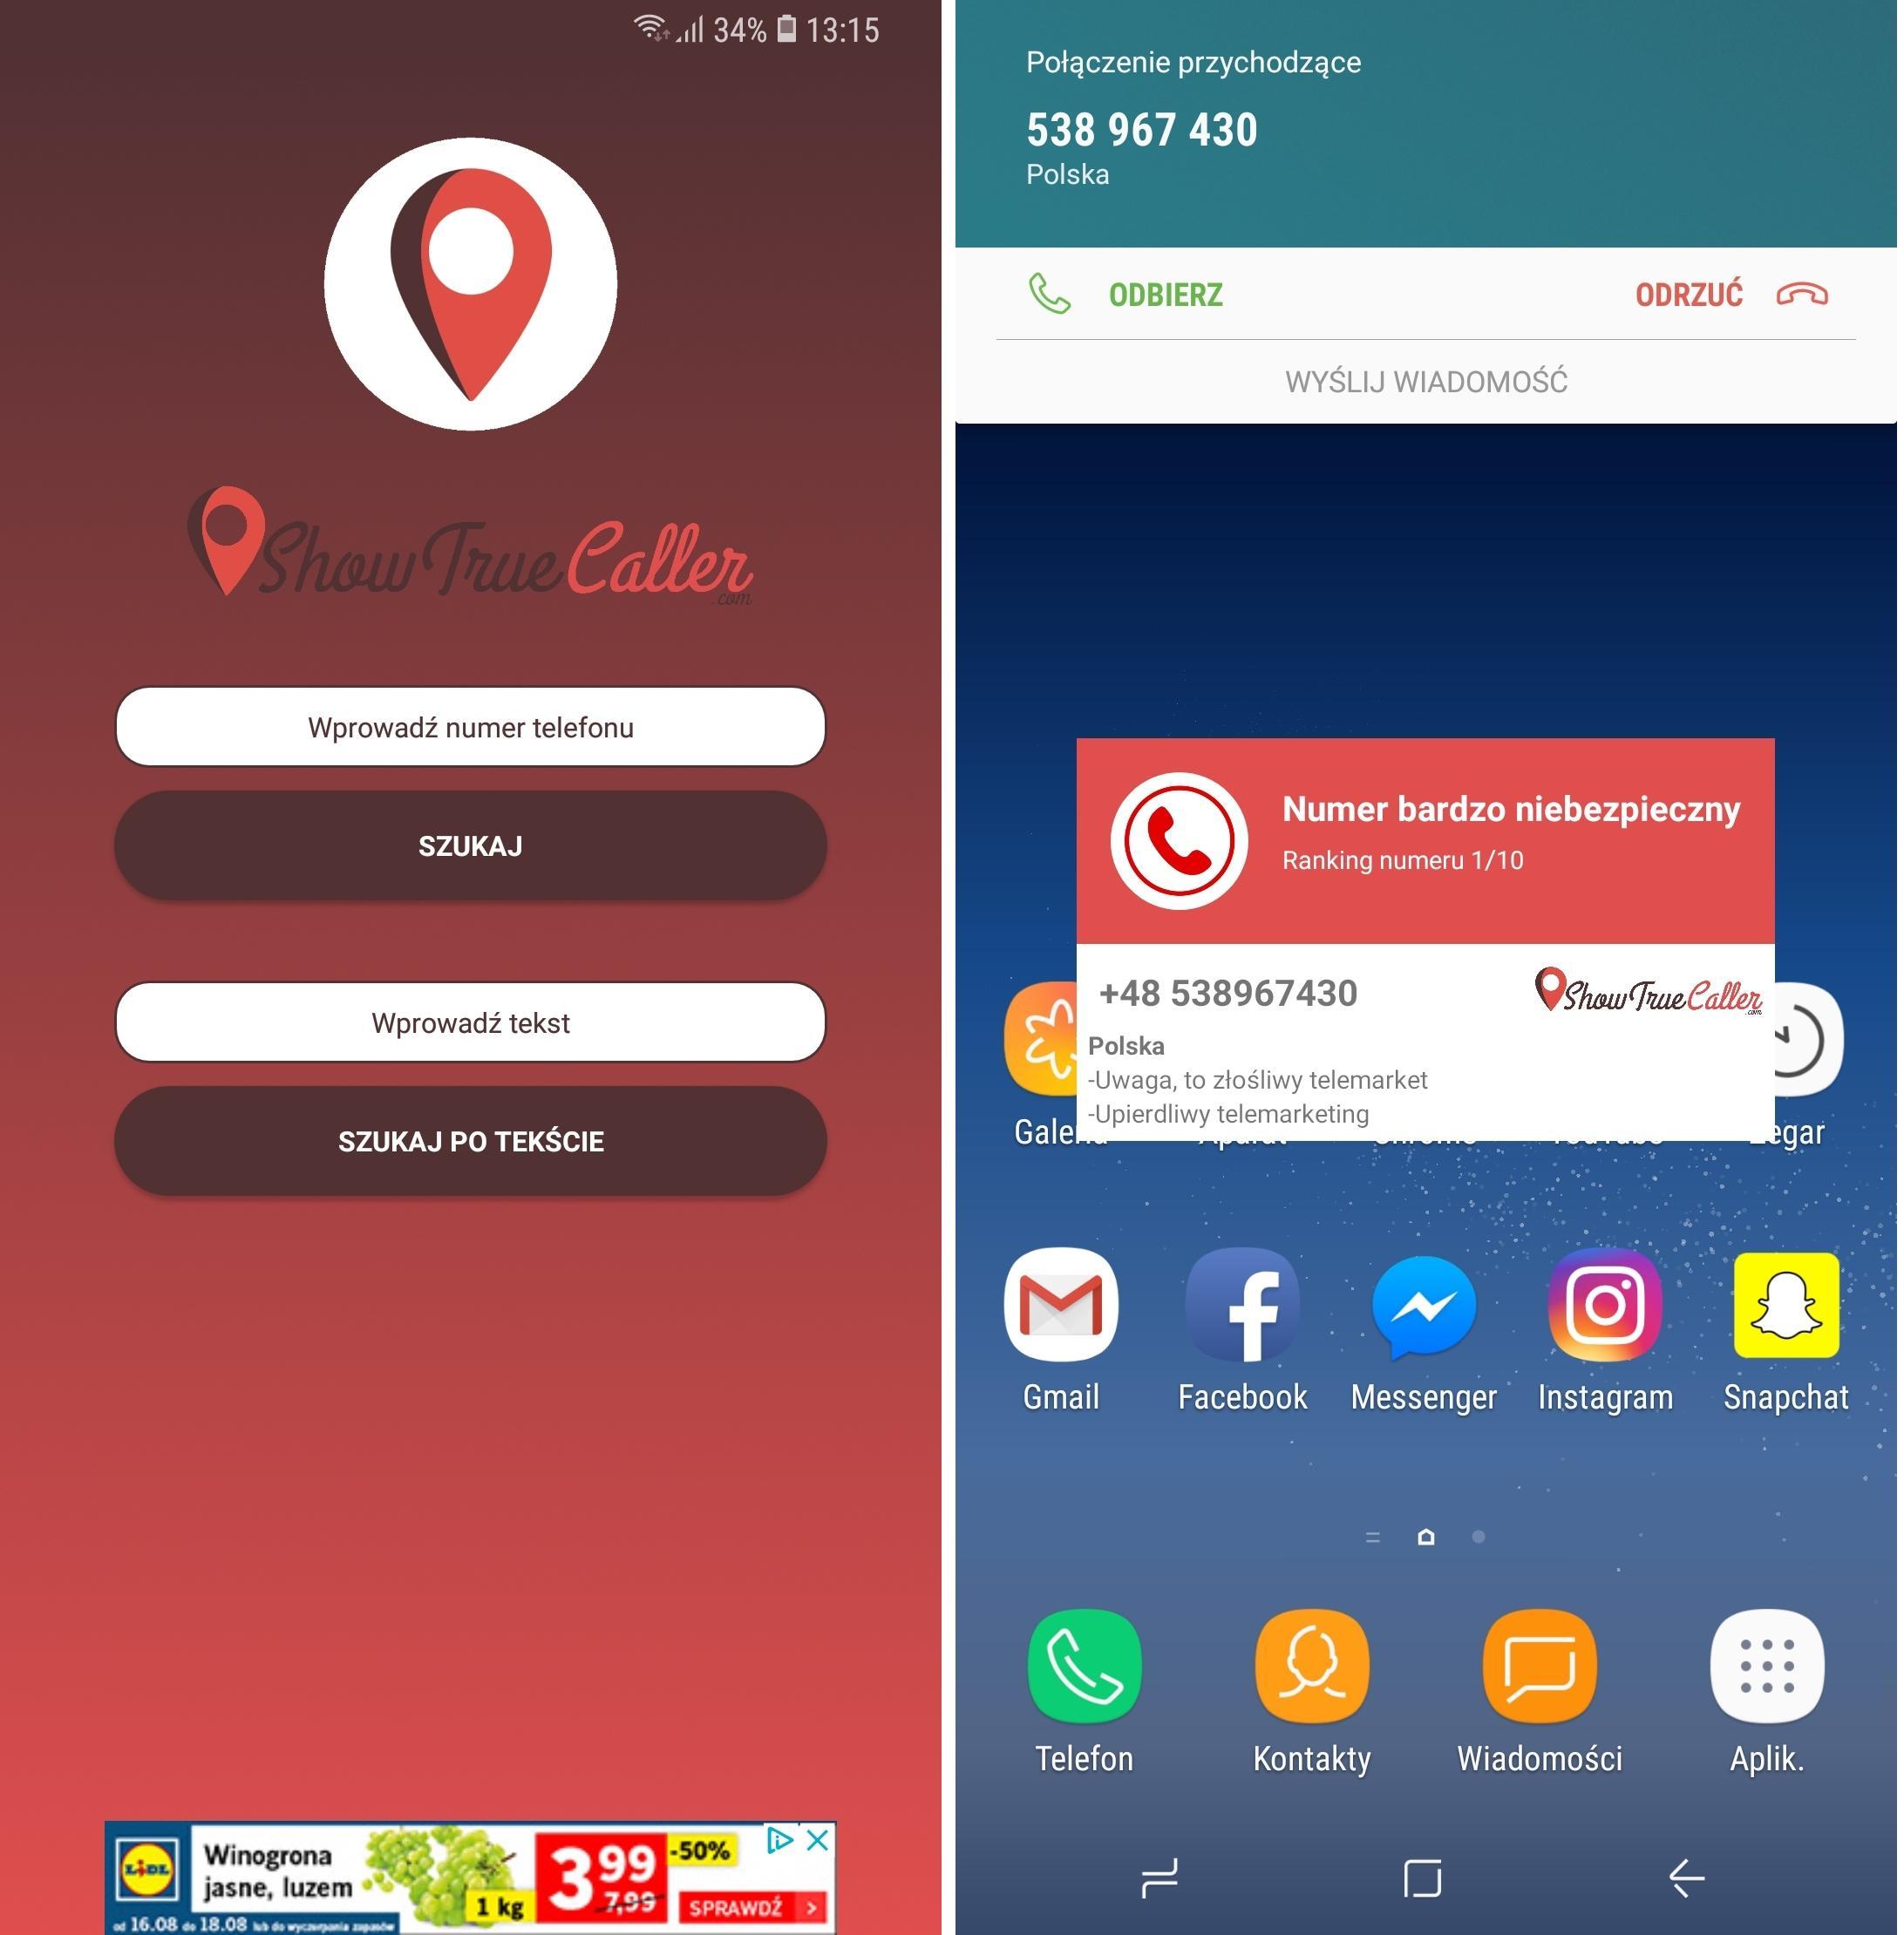 Kto dzwoni - Show True Caller PL for Android - APK Download